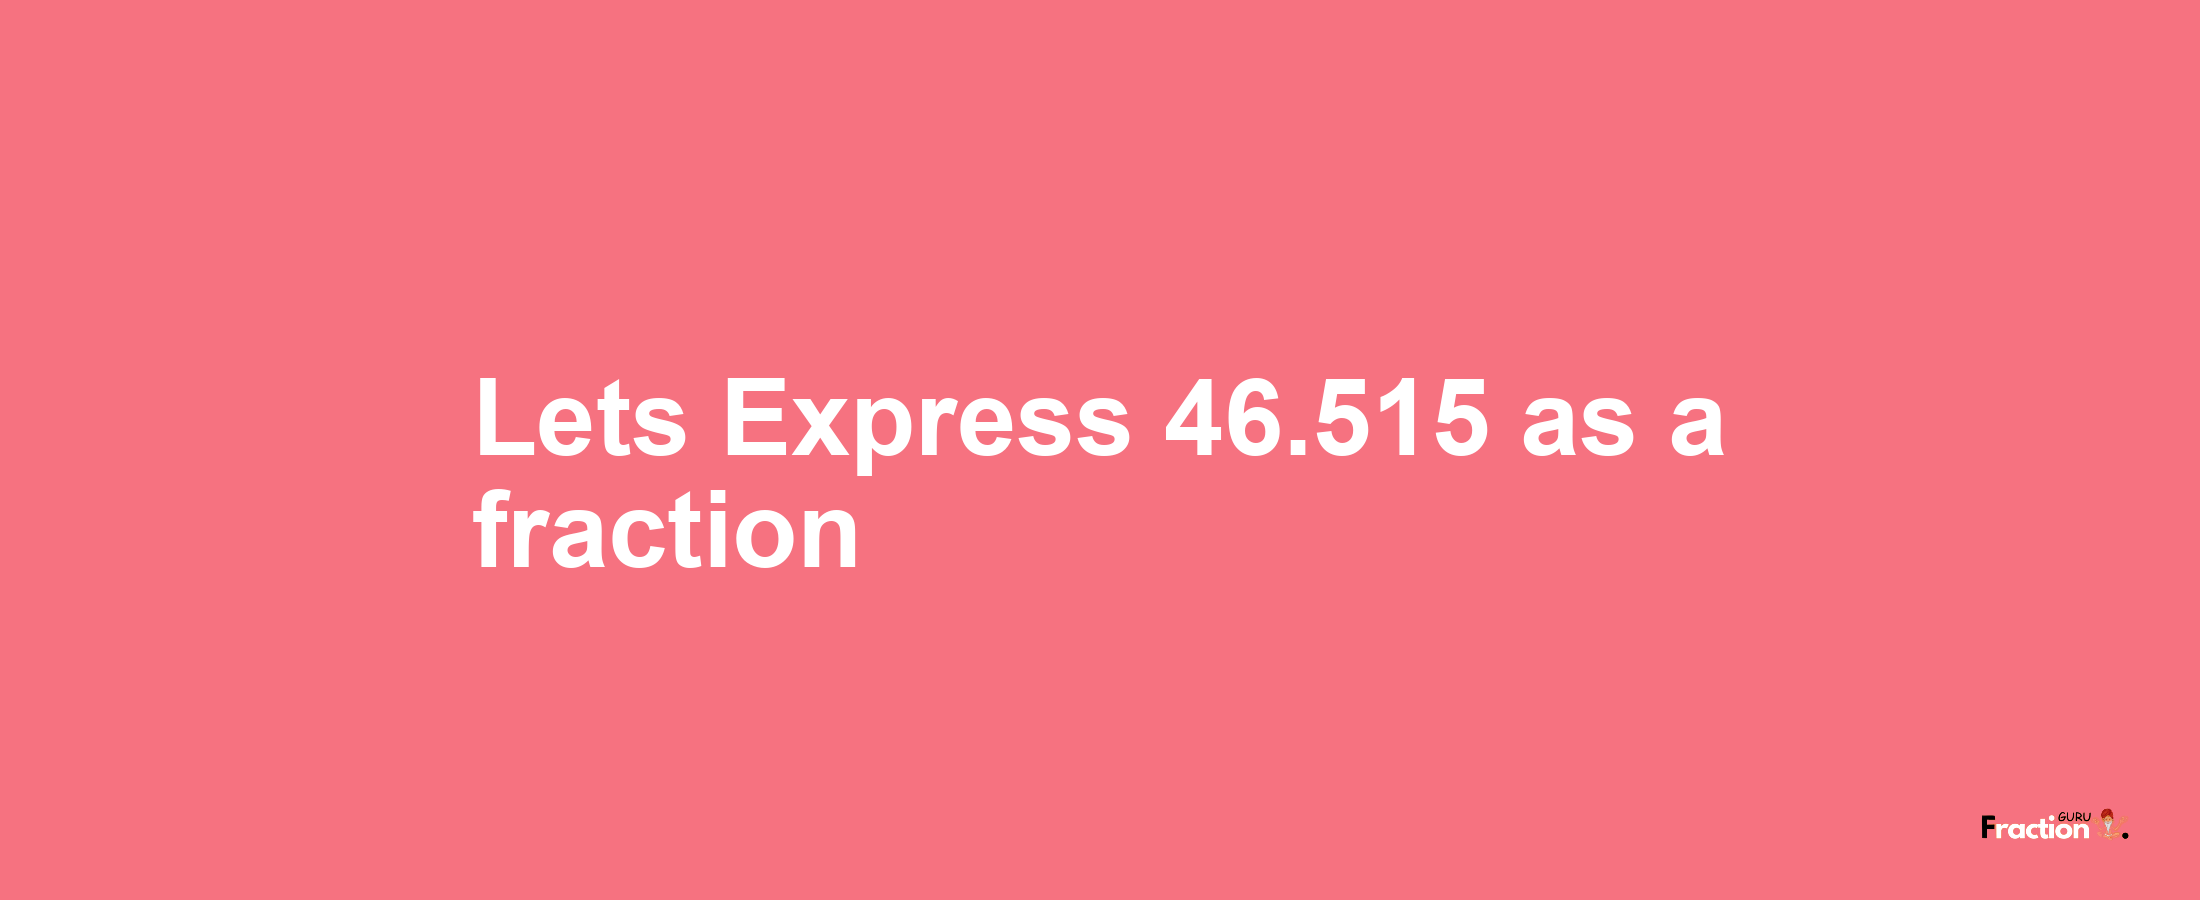 Lets Express 46.515 as afraction